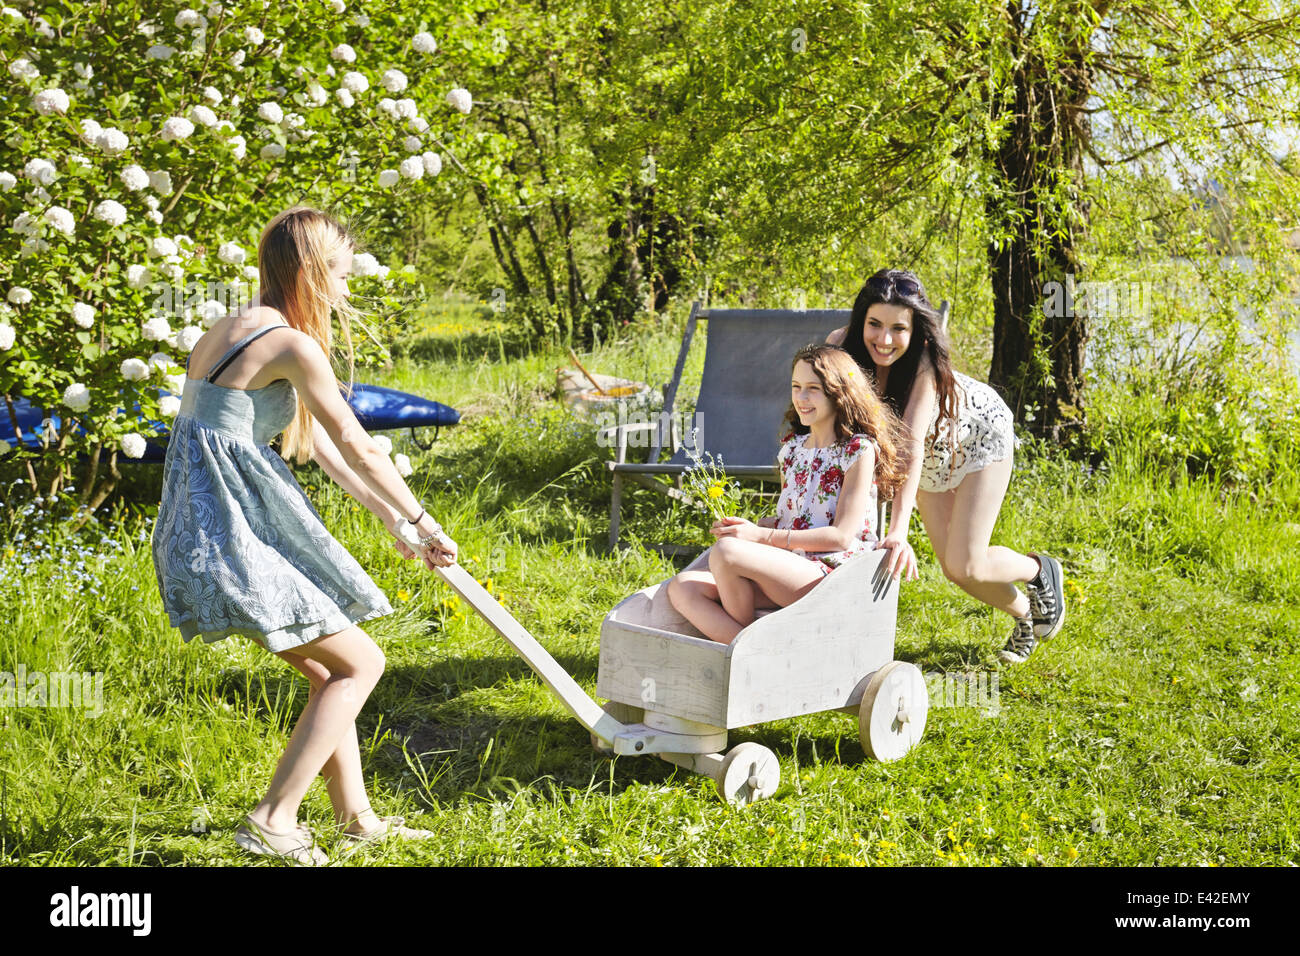 Young women playing with toy cart Stock Photo